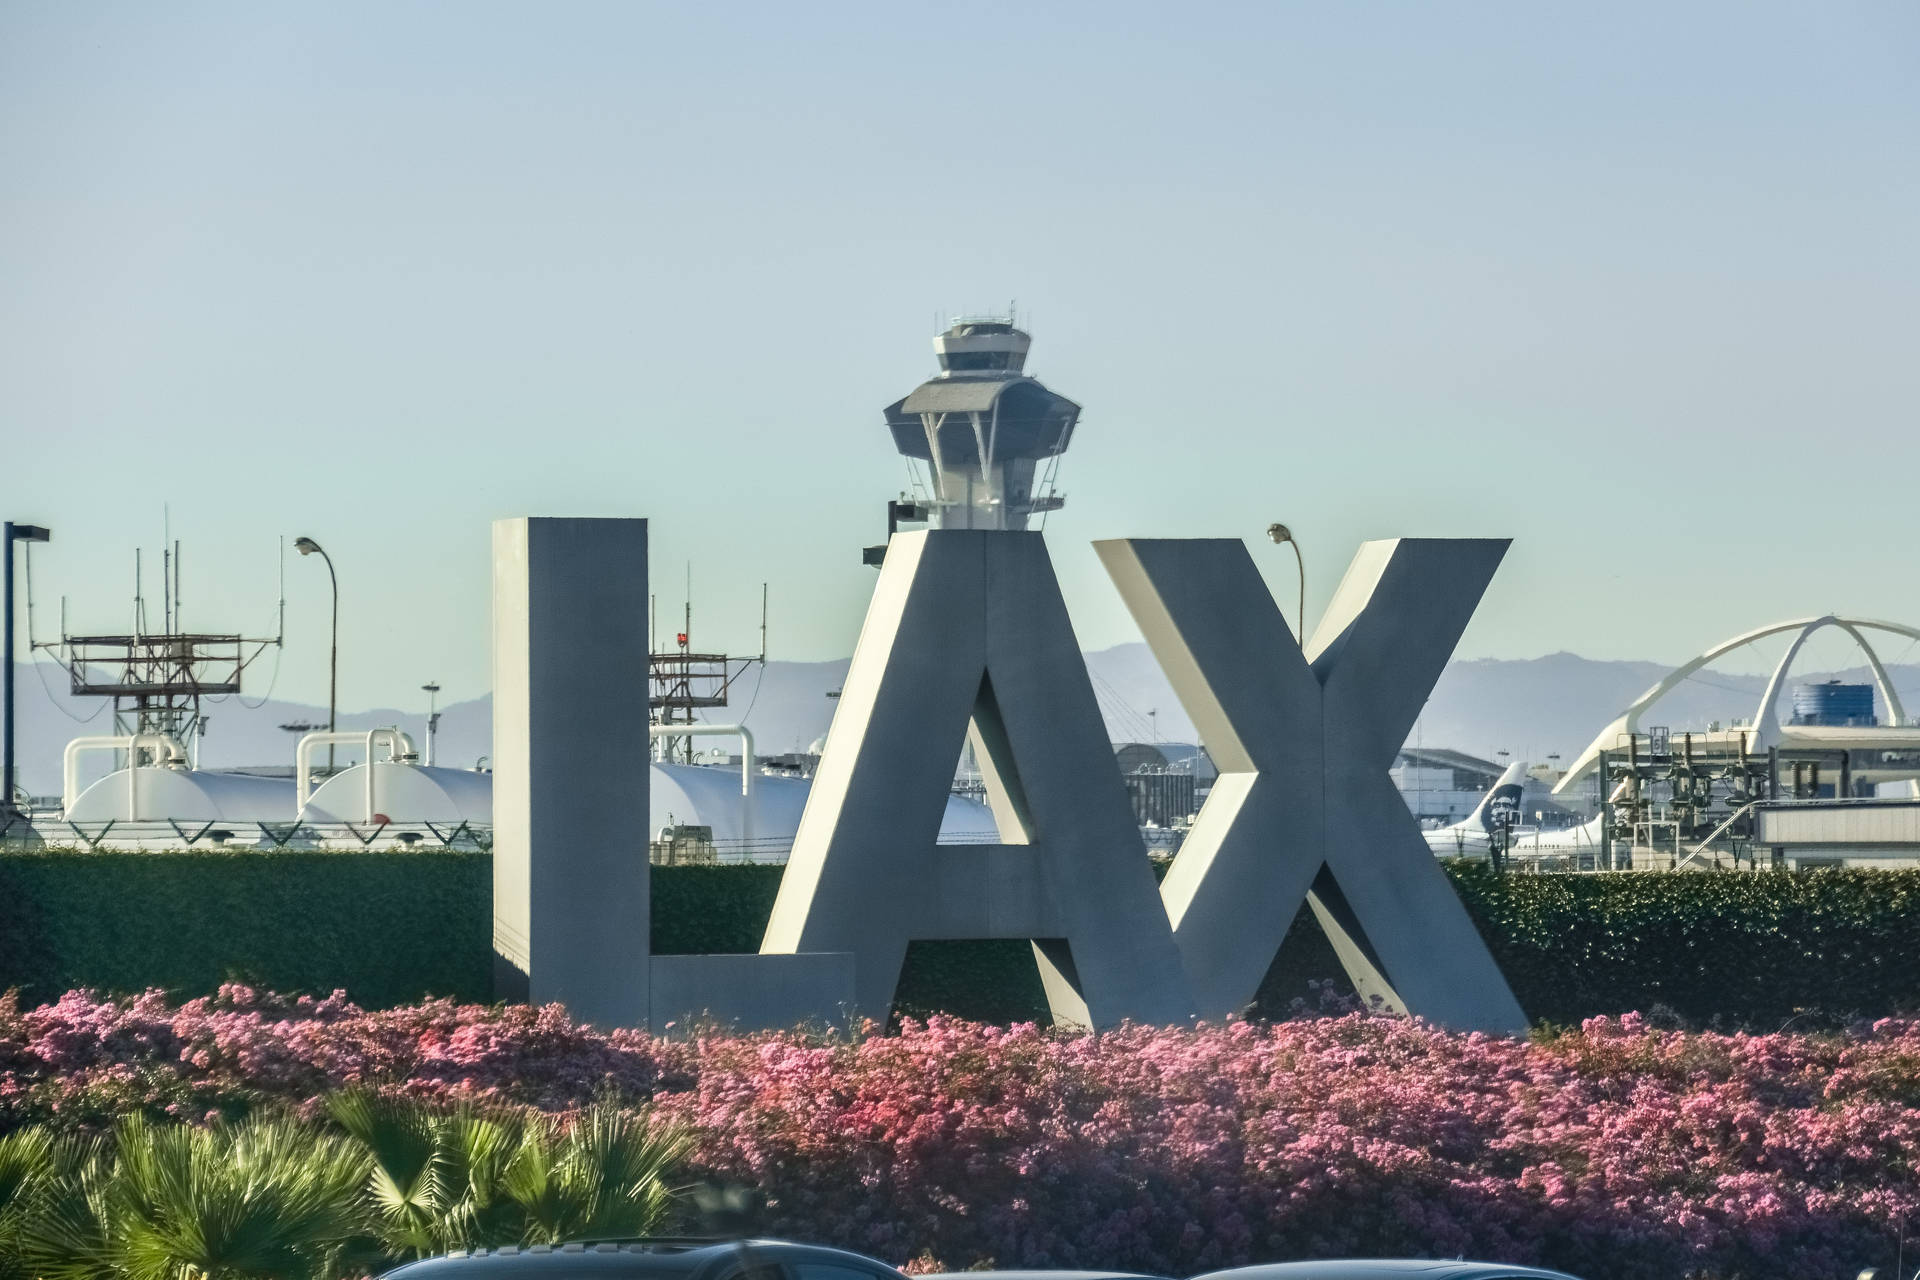 Lax Photos Download The BEST Free Lax Stock Photos  HD Images